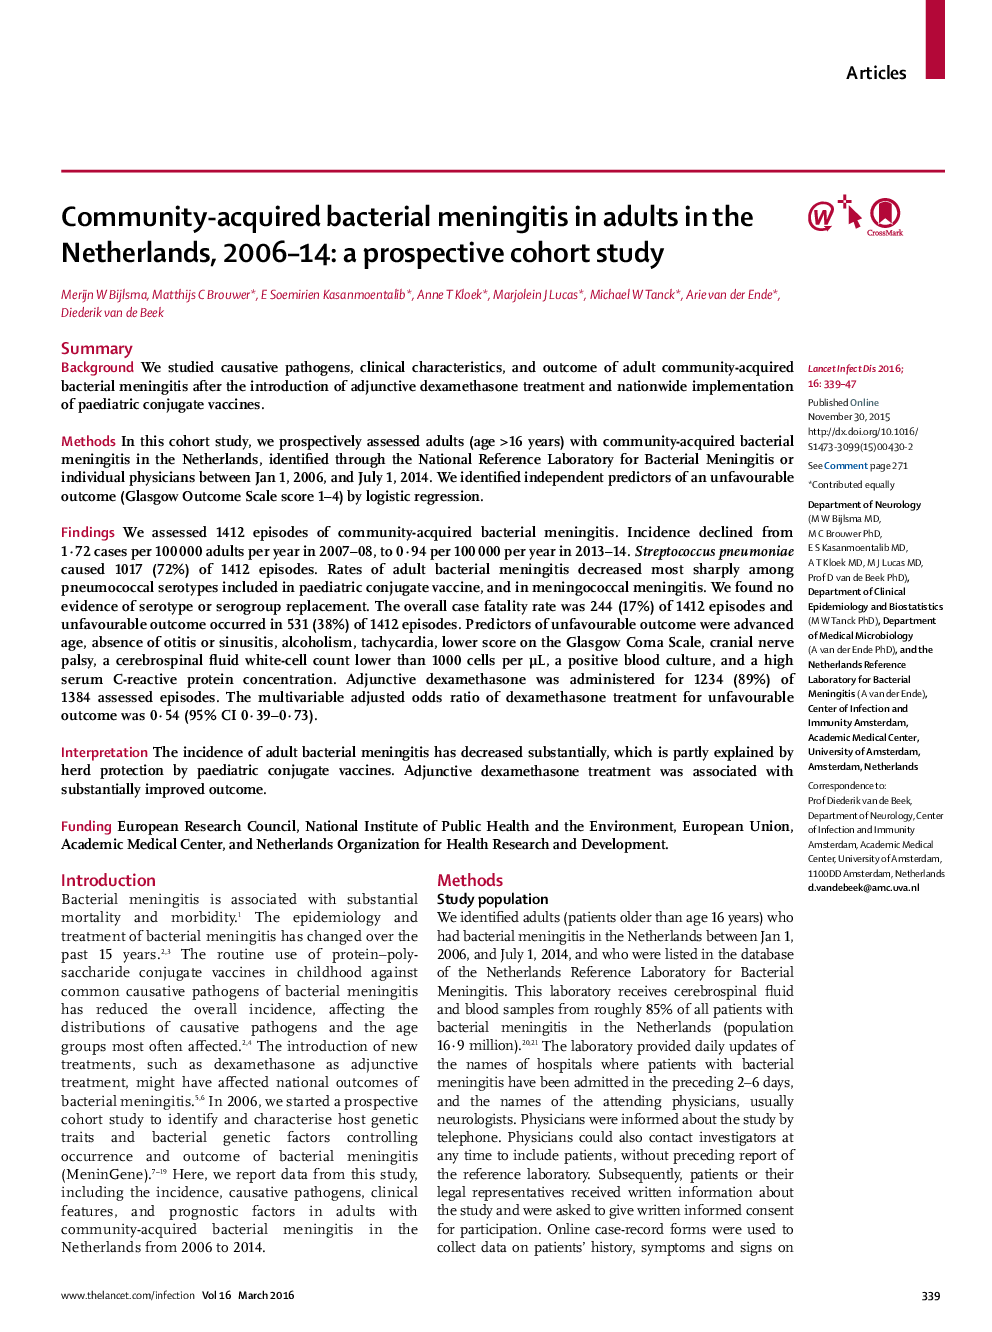 Community-acquired bacterial meningitis in adults in the Netherlands, 2006–14: a prospective cohort study